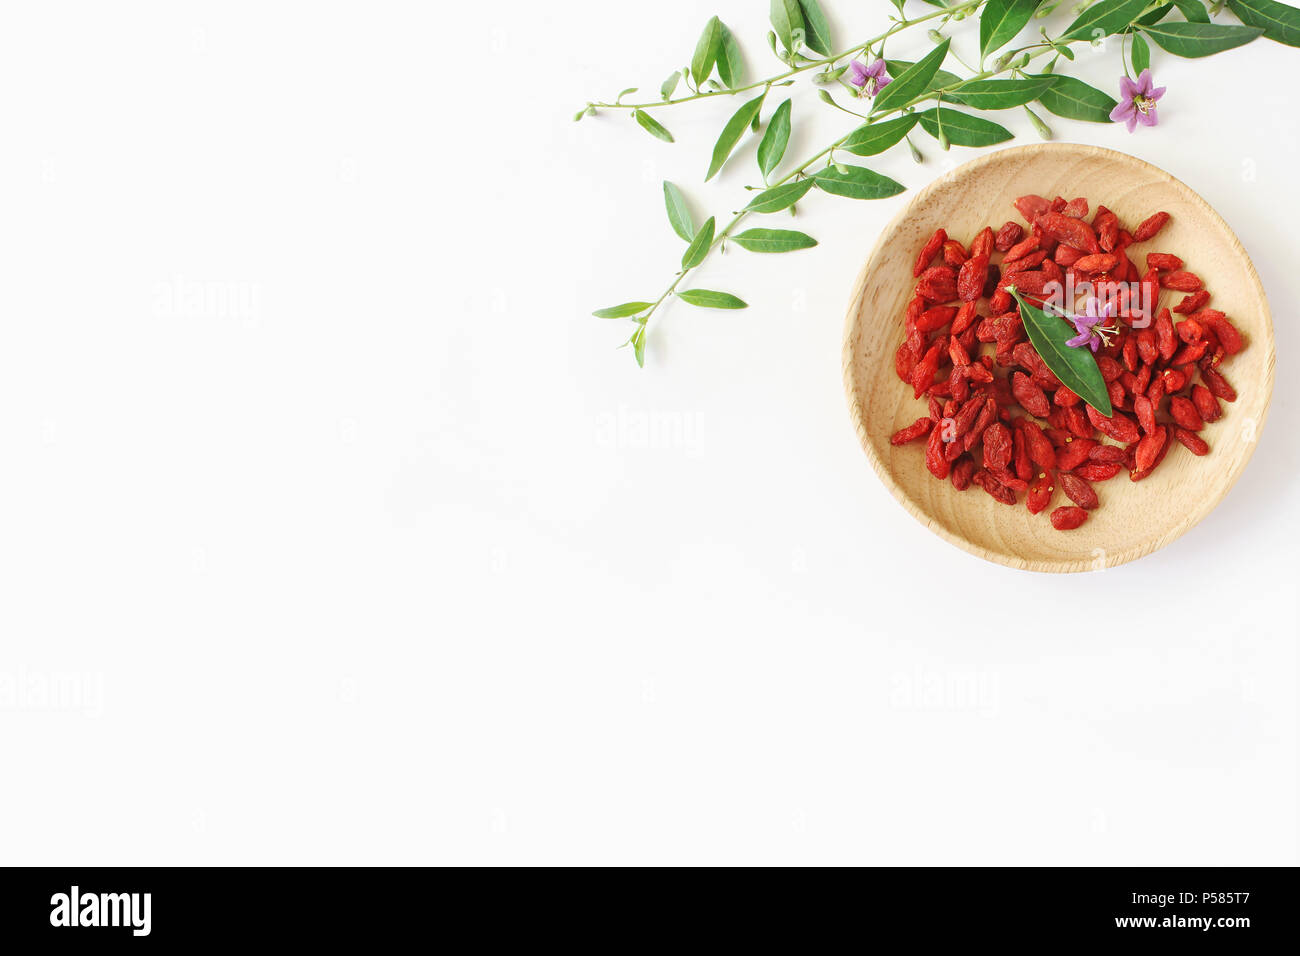 Heap of dried Goji berries fruit, Lycium barbarum in wooden bowl on white table. Blossoming wolfberry herbal plant branch. Healthy superfood. Flatlay, top view. Stock Photo